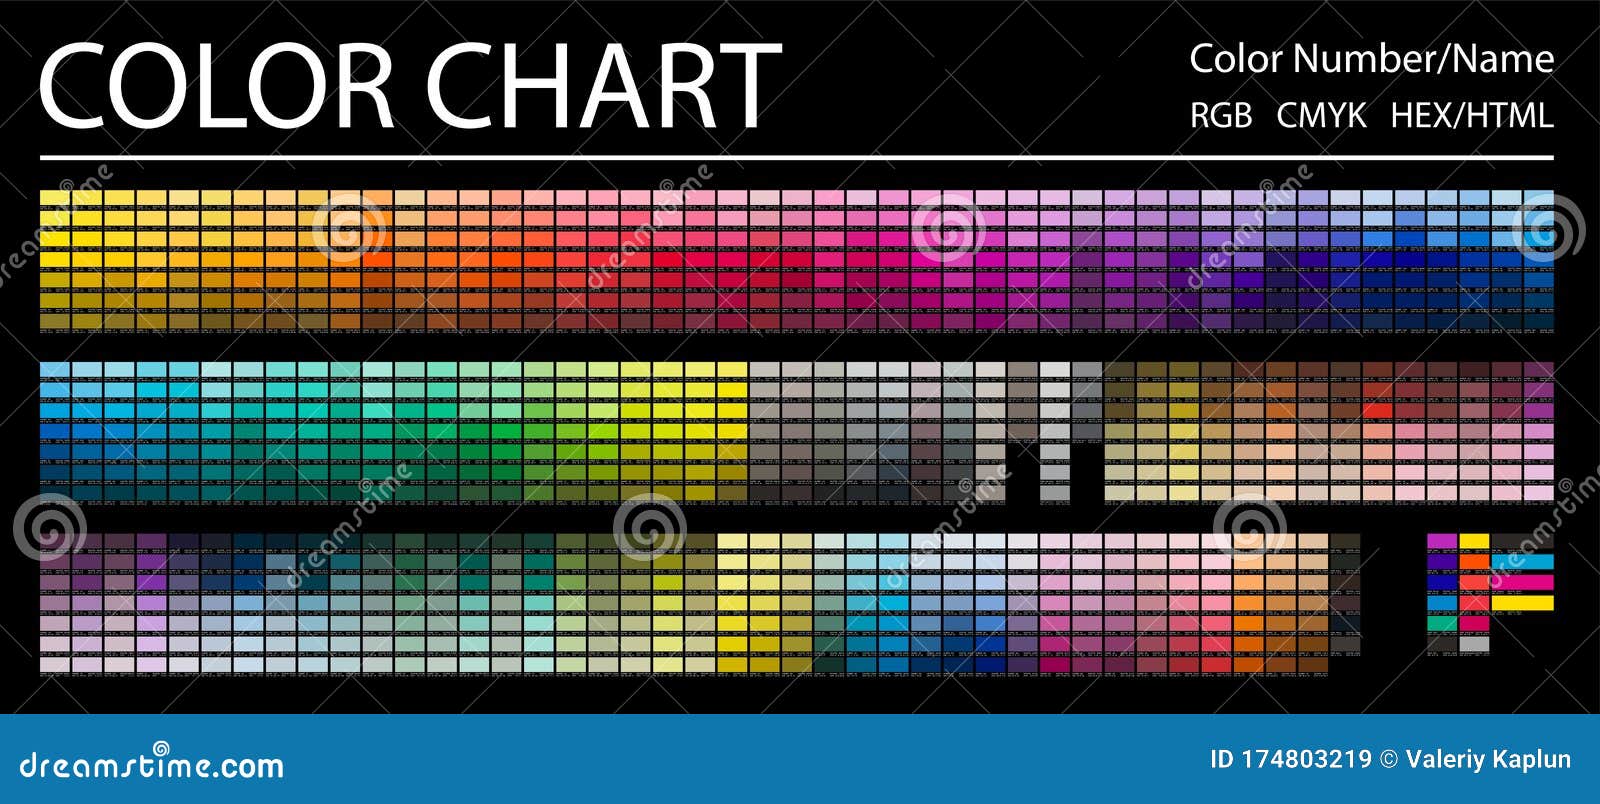 https://thumbs.dreamstime.com/z/color-chart-print-test-page-numbers-names-rgb-cmyk-hex-html-codes-vector-palette-table-illustration-174803219.jpg